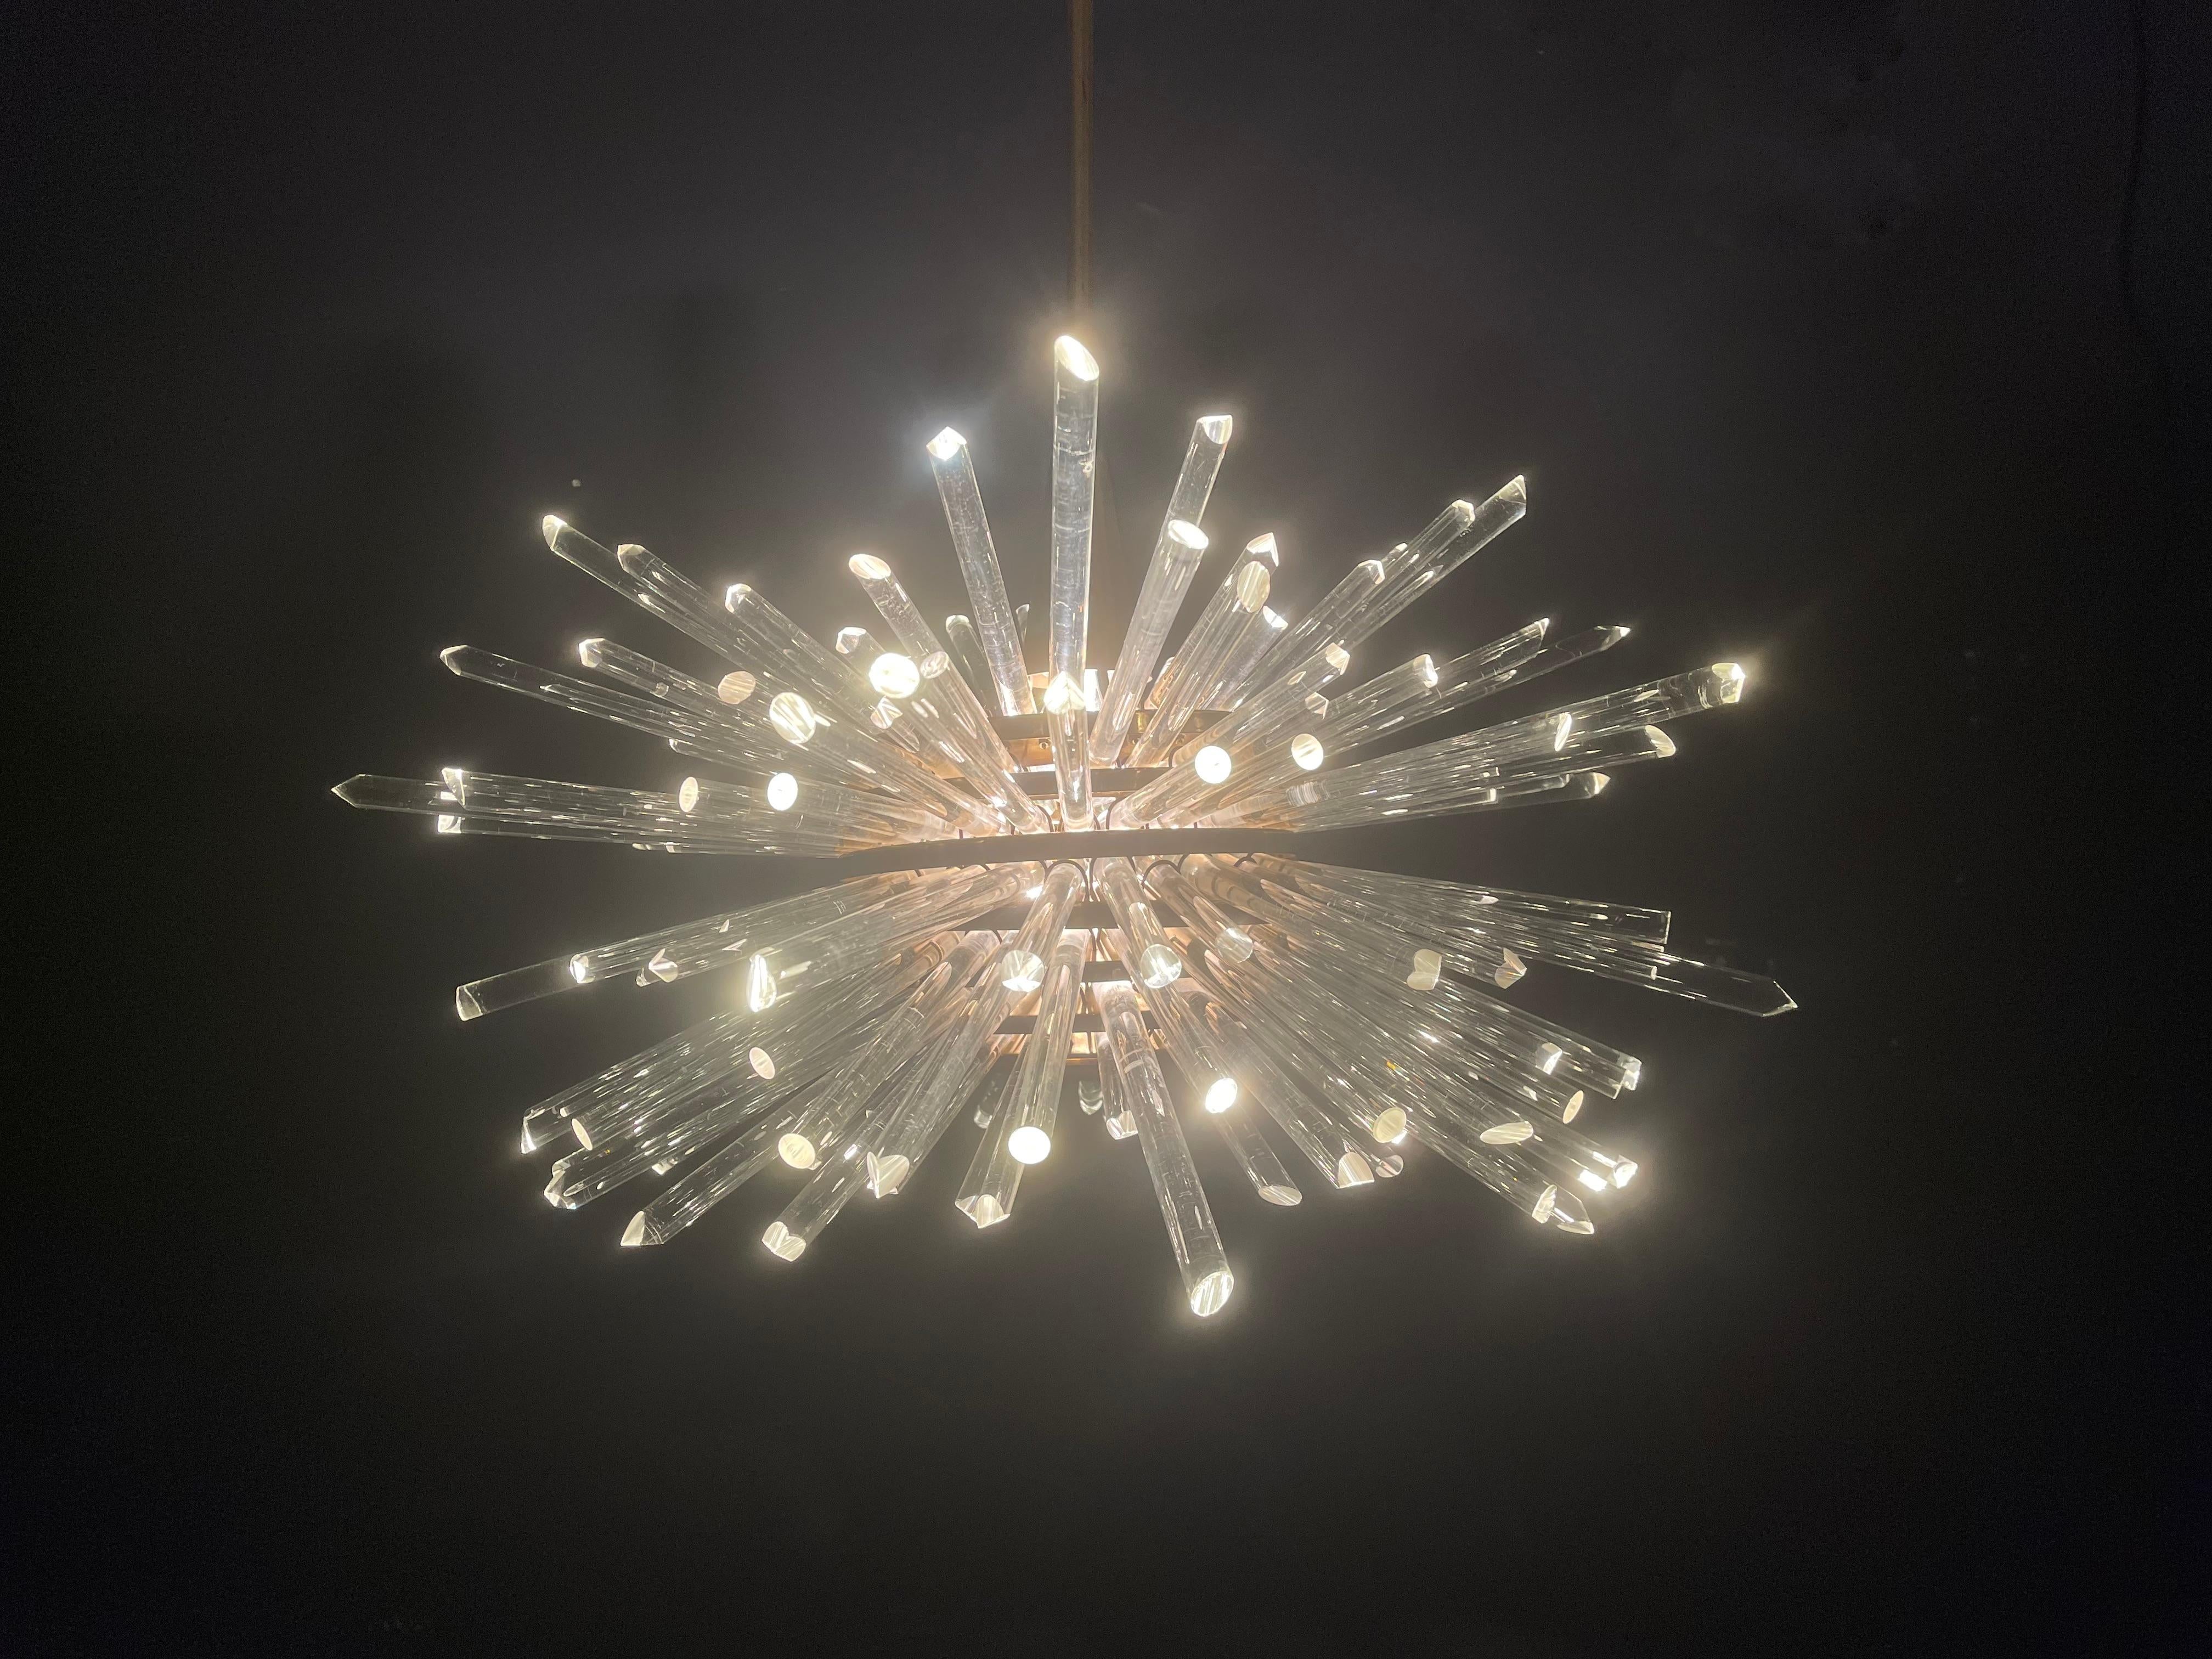 breathtaking sputnik chandelier by by the famous company bakalowits from vienna. an iconic design and very futuristic for it´s time.